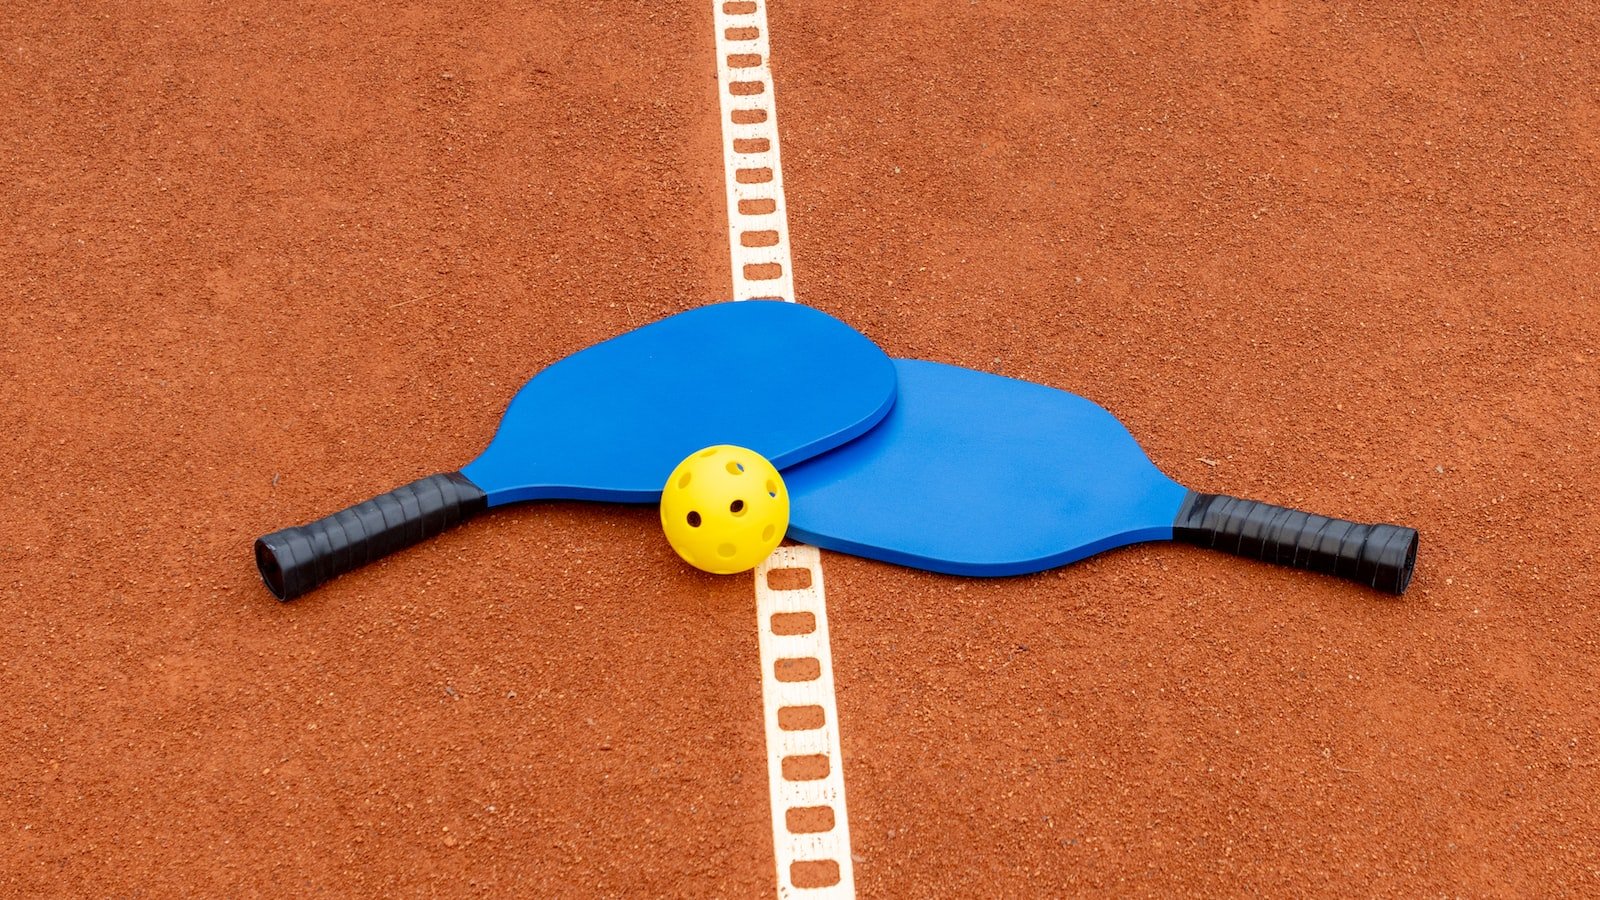 The Best Pickleball Paddles for Spin and Control